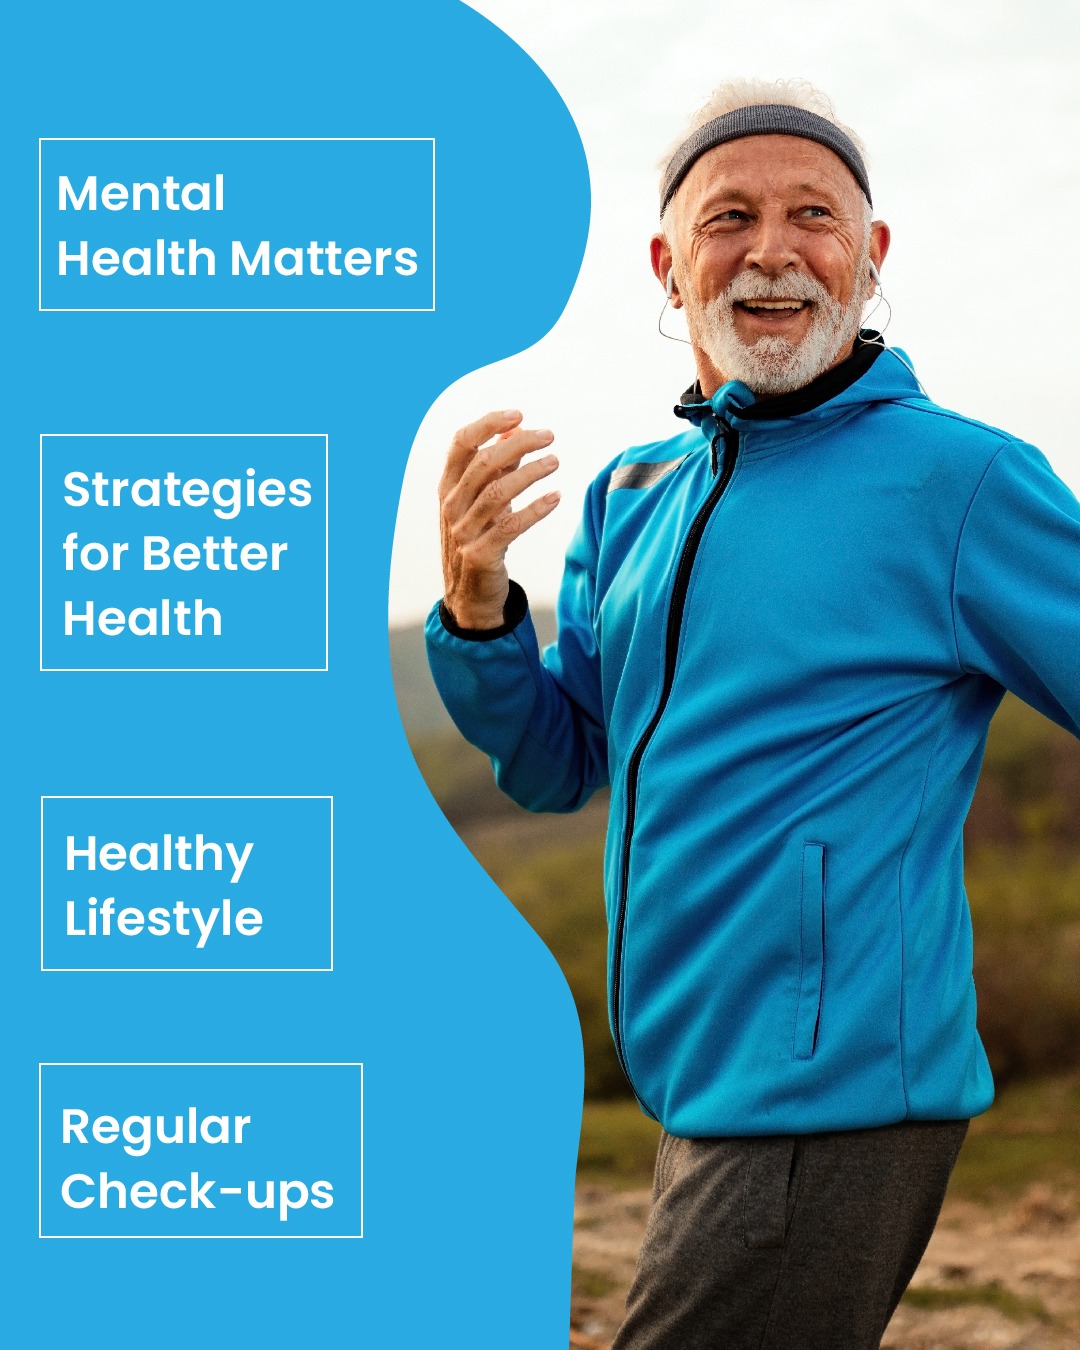 Image representing the importance of mental health, strategies for better health, healthy lifestyle, and regular check-ups during Men's Health Month.